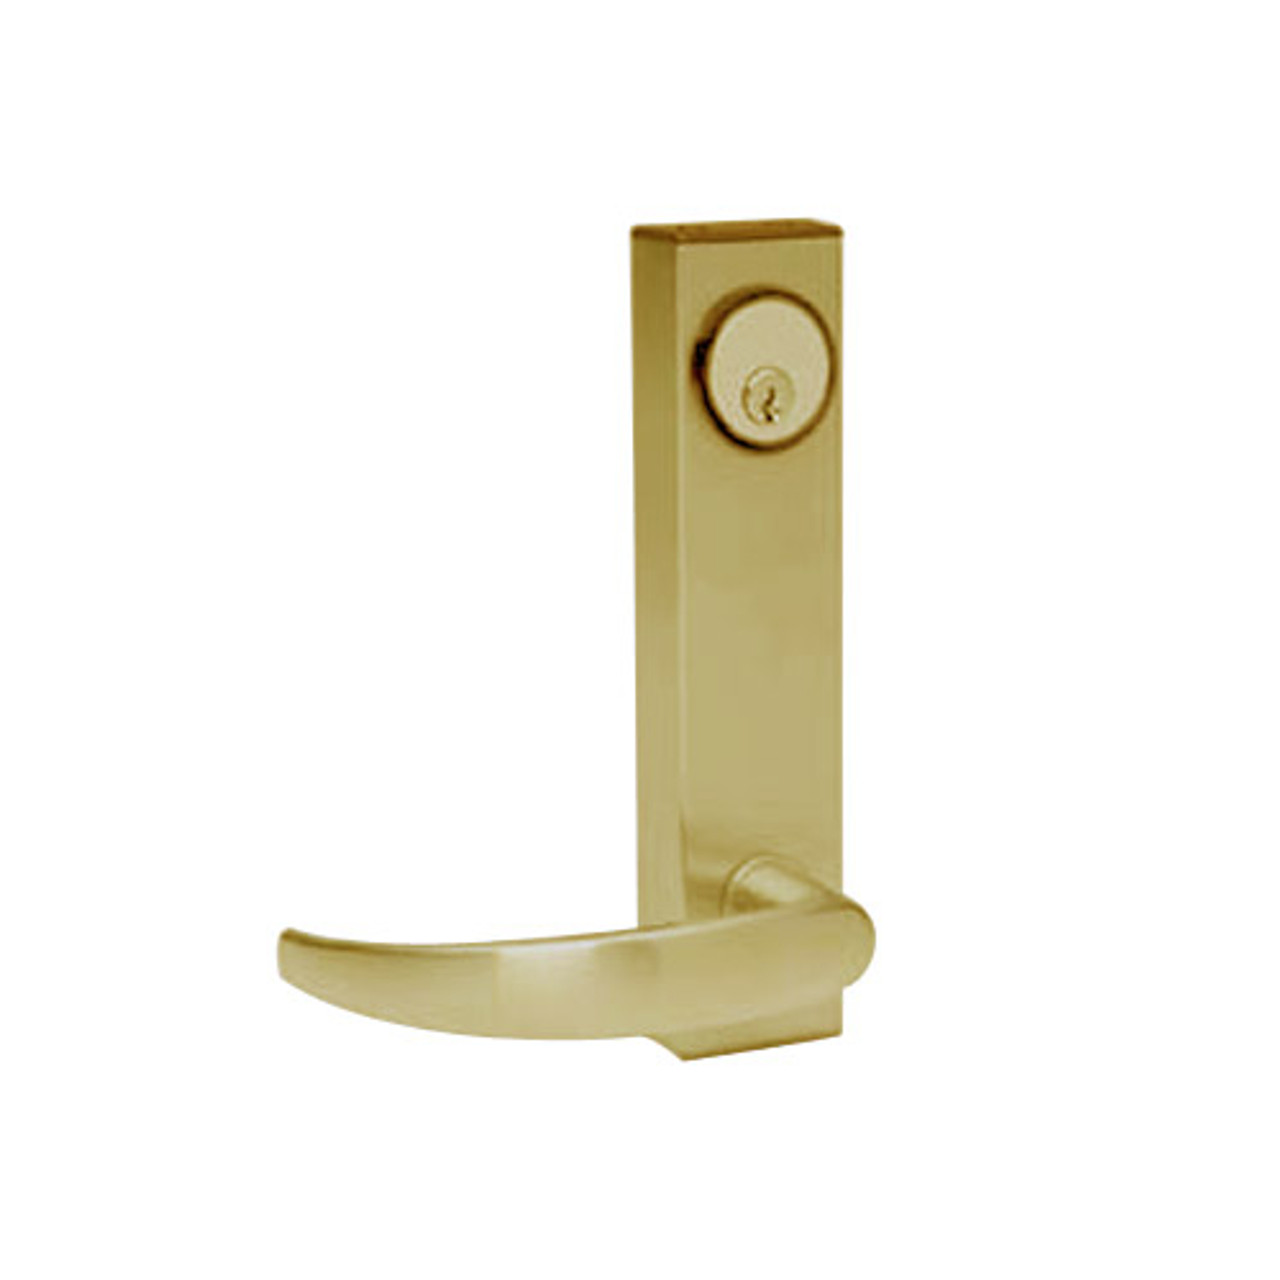 3080E-01-0-96-50 US4 Adams Rite Electrified Entry Trim with Curve Lever in Satin Brass Finish